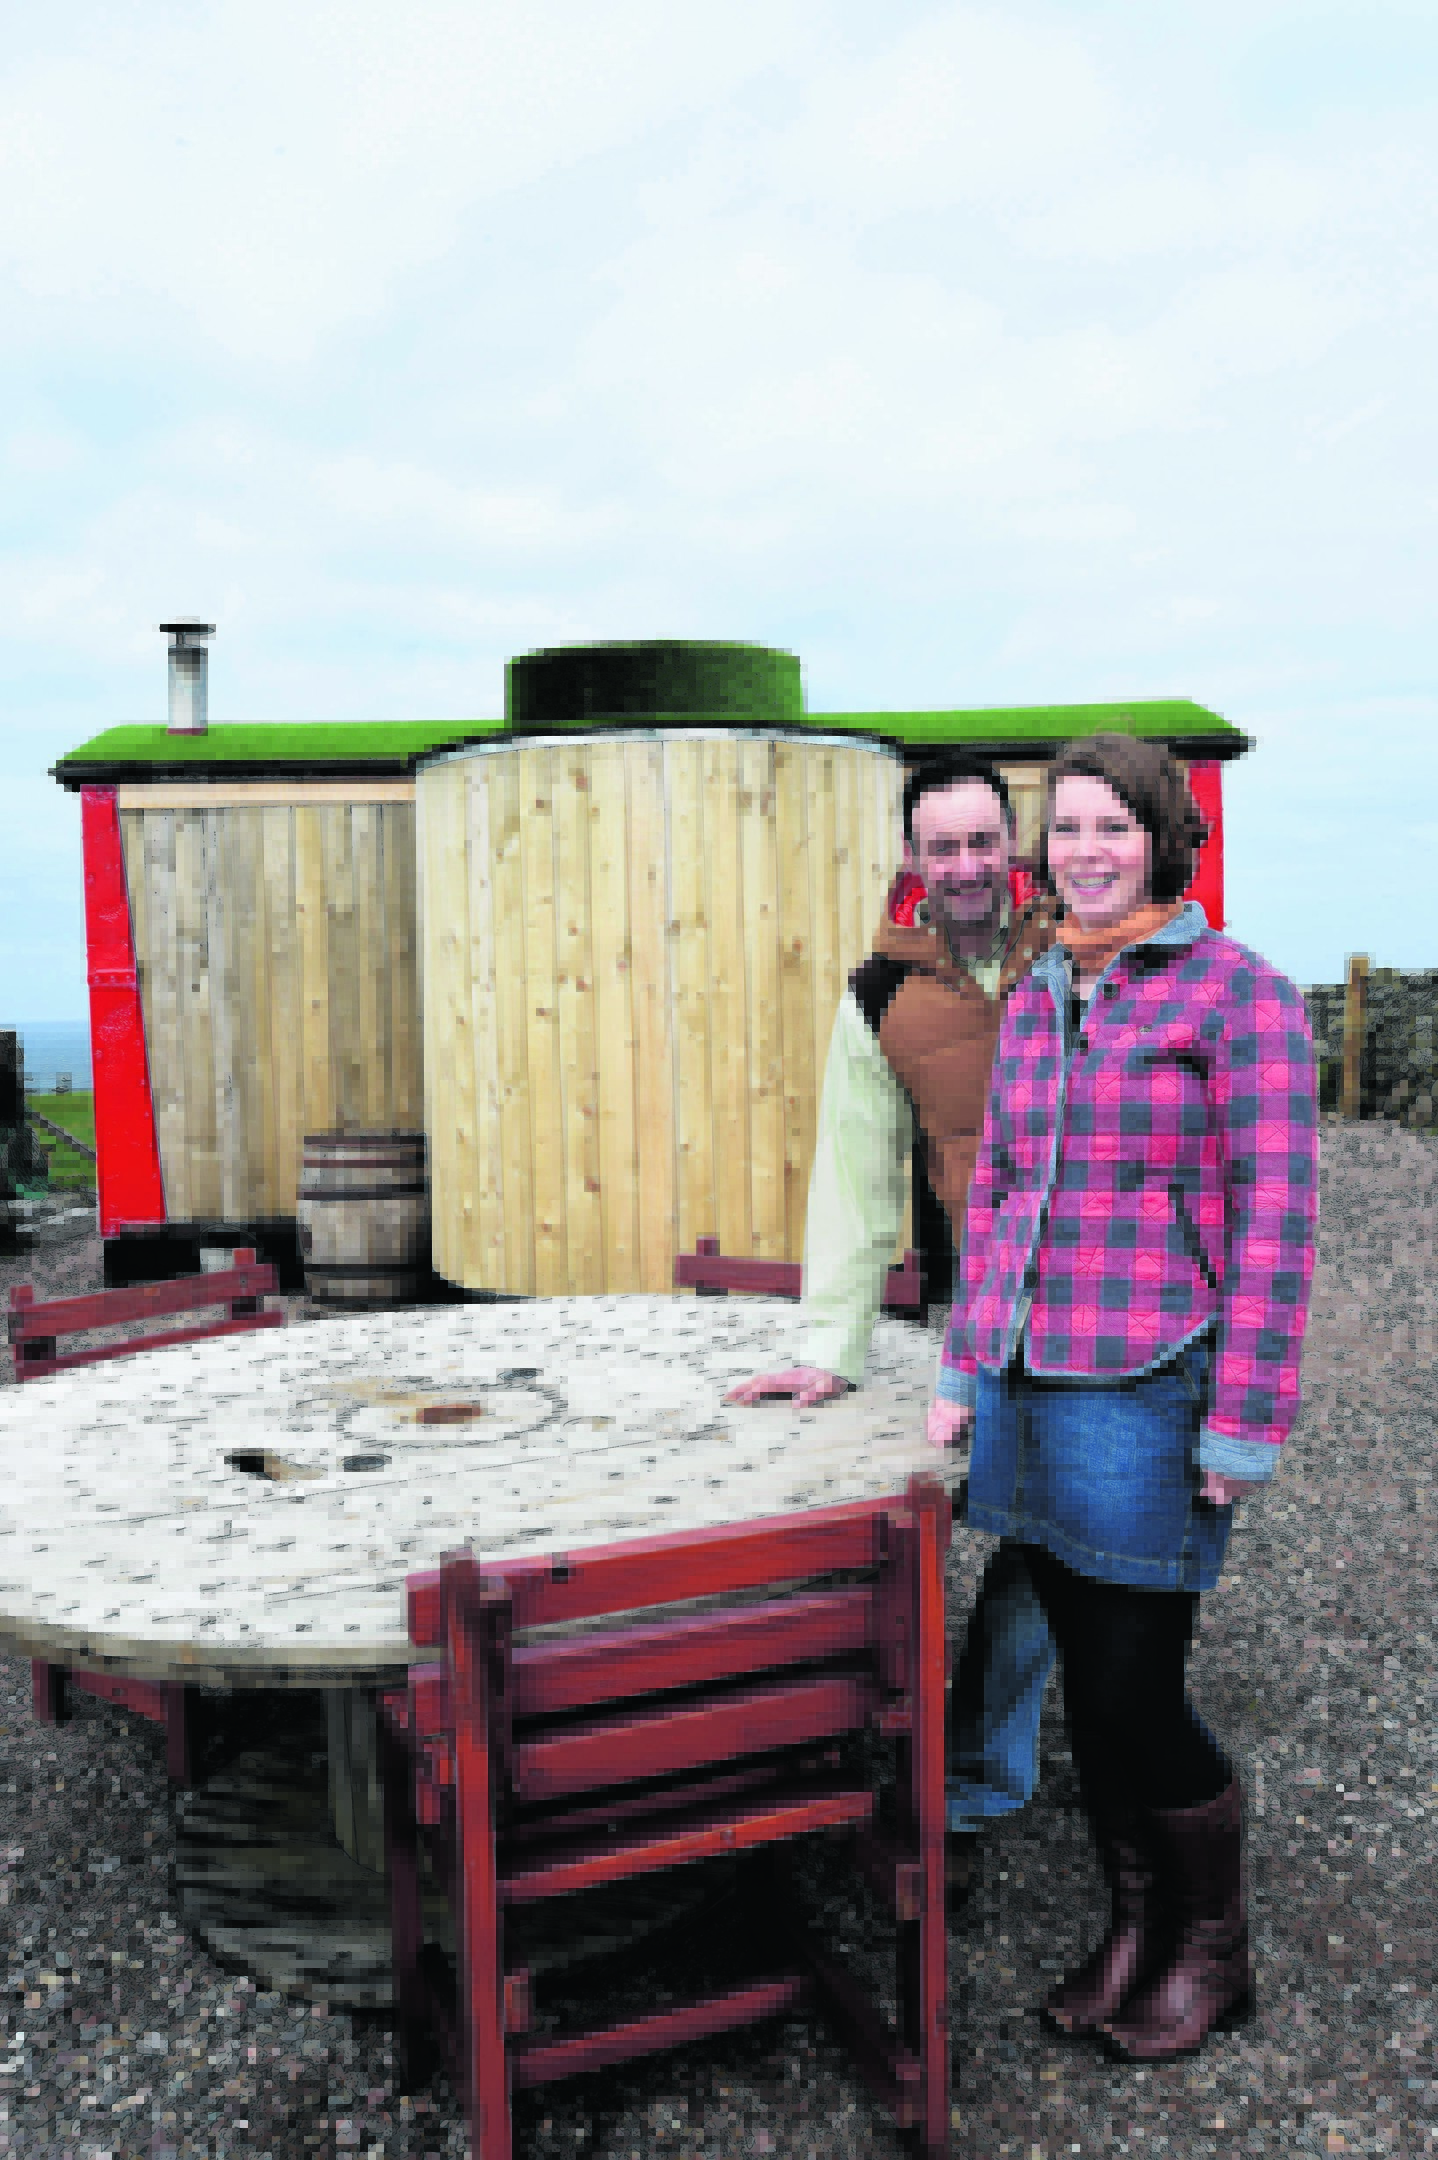 YOUR HOME - RAILWAY CARRIAGE (DUNCAN BROWN) MATTHEW AND CAROLE SHORT AT THE REAR OF THE 1930'S FREIGHT TRAIN CARRIAGE THEY CONVERTED TO A HOLIDAY HOME AT HIGH SEAS HOBBITS, ROSEHEARTY.